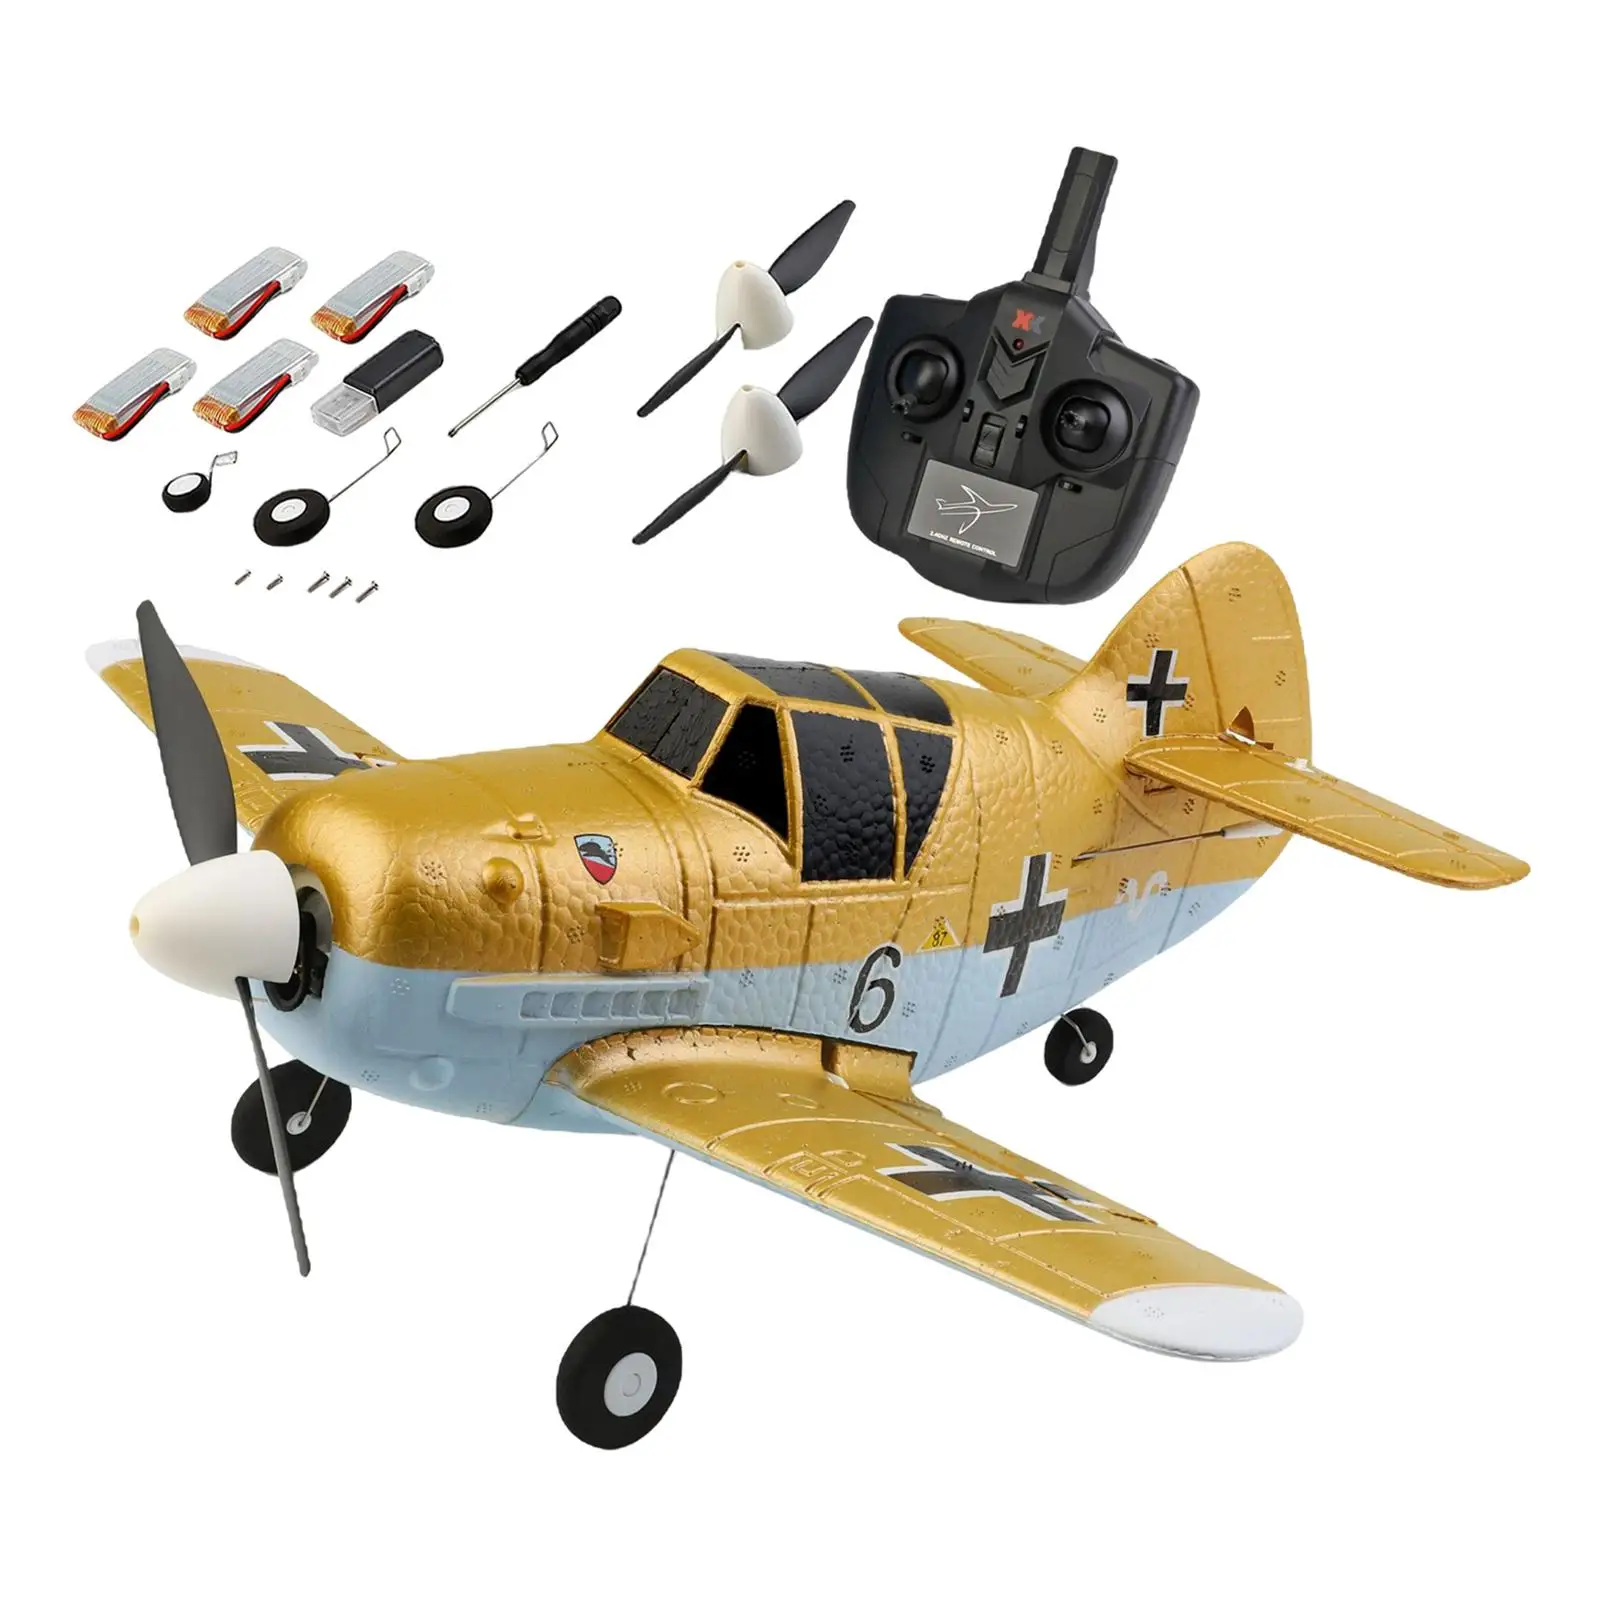 XK A250 RC Plane for Kids, 2.4G 4 Channel Remote Control Airplane Ready to Fly,